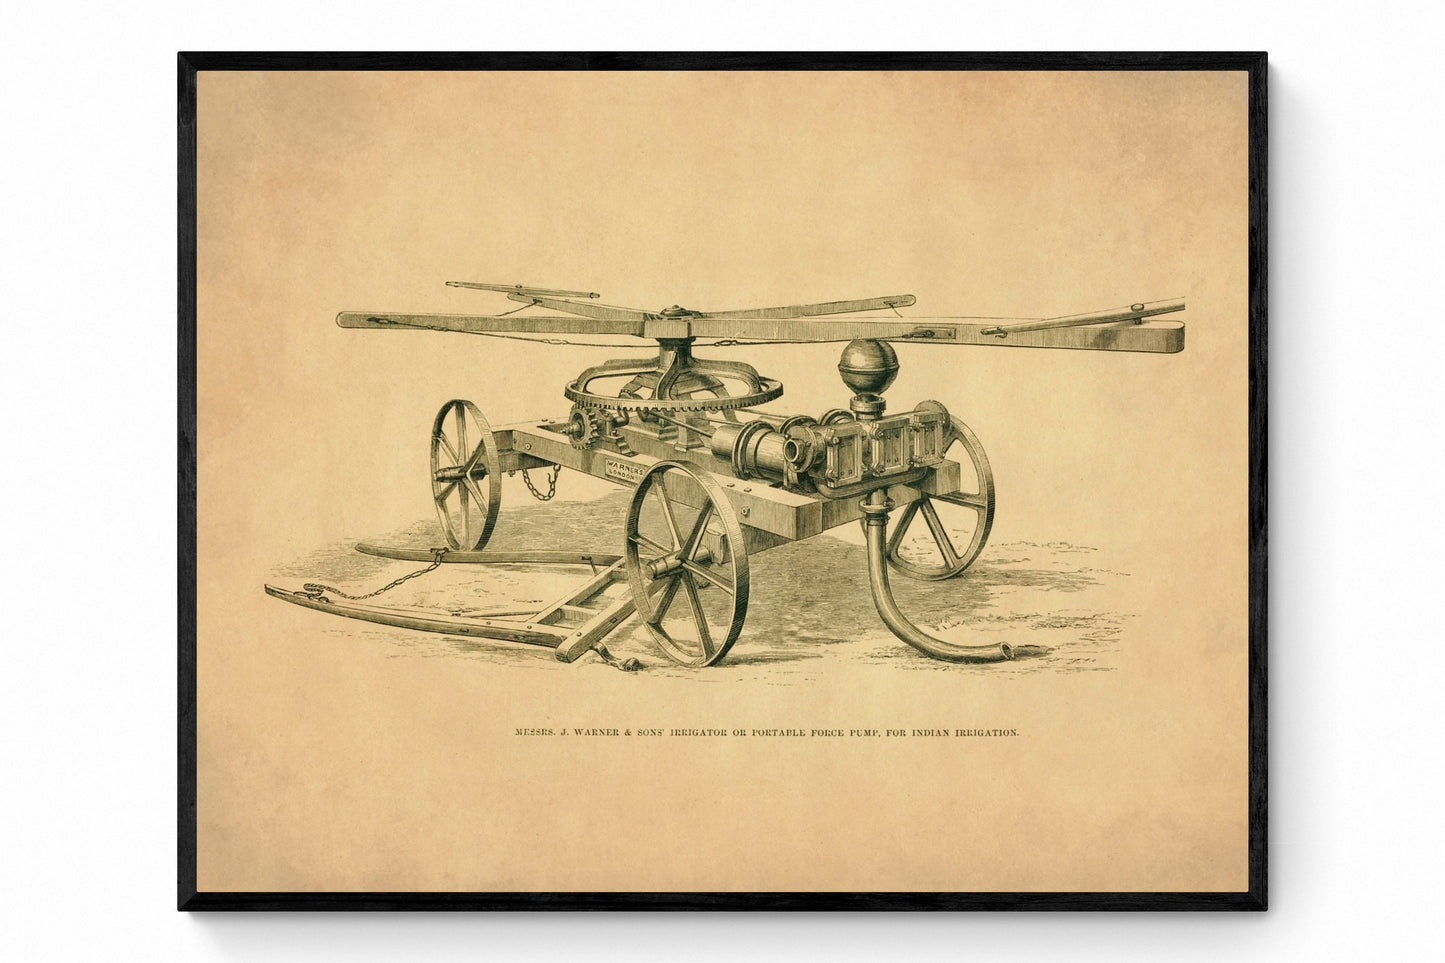 Irrigator or Portable Force Pump for Indian Irrigation - Antique Reproduction - Agriculture - Victorian Technology - Available Framed